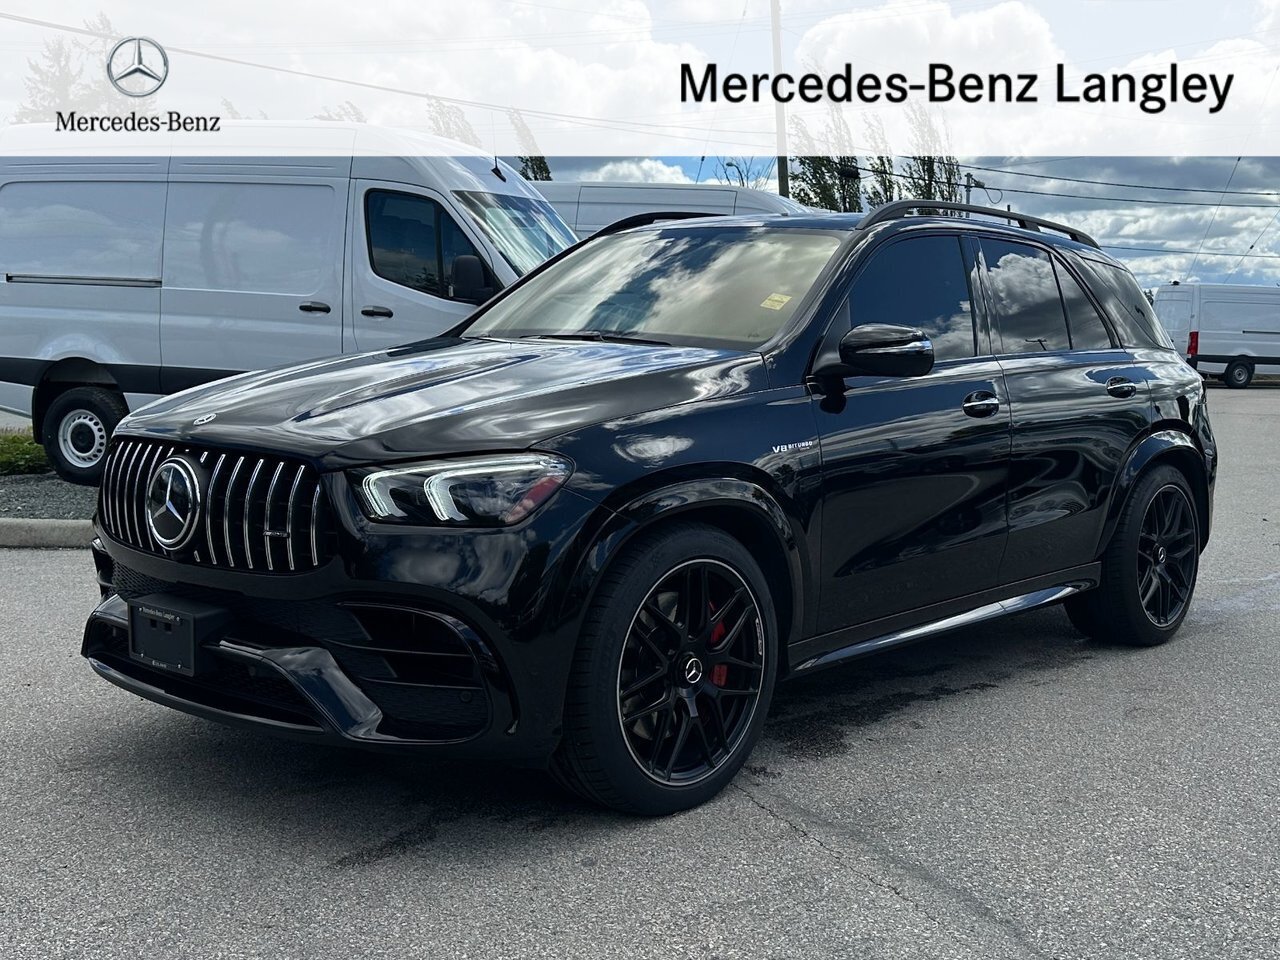 2021 Mercedes-Benz GLE-Class 4MATIC+ SUV | Local | One Owner | Star Certified |